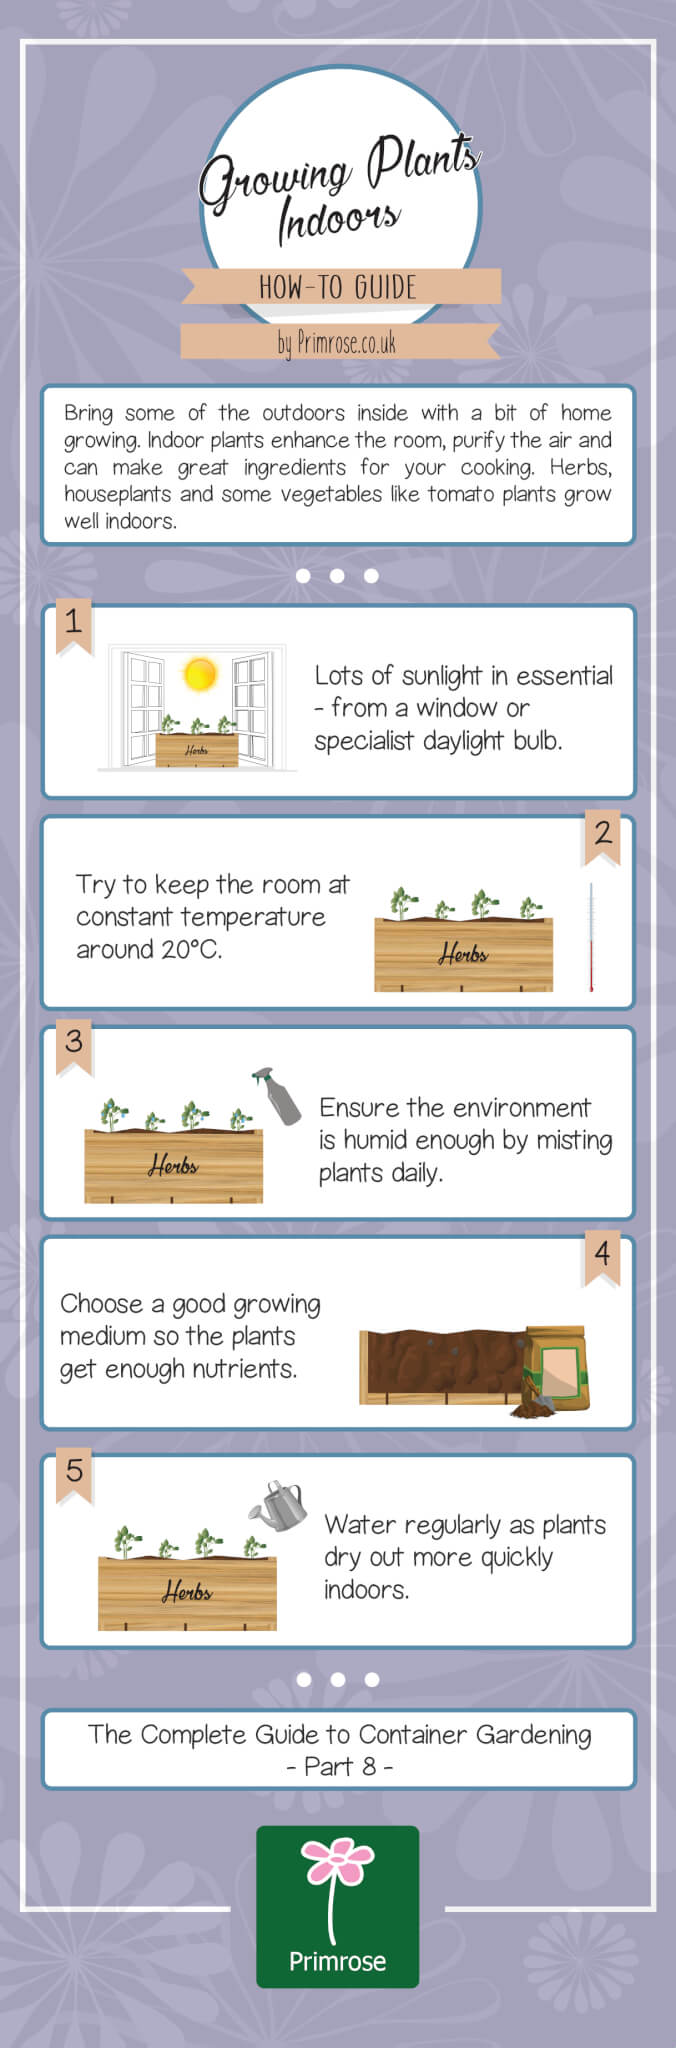 How to grow plants indoors infographic